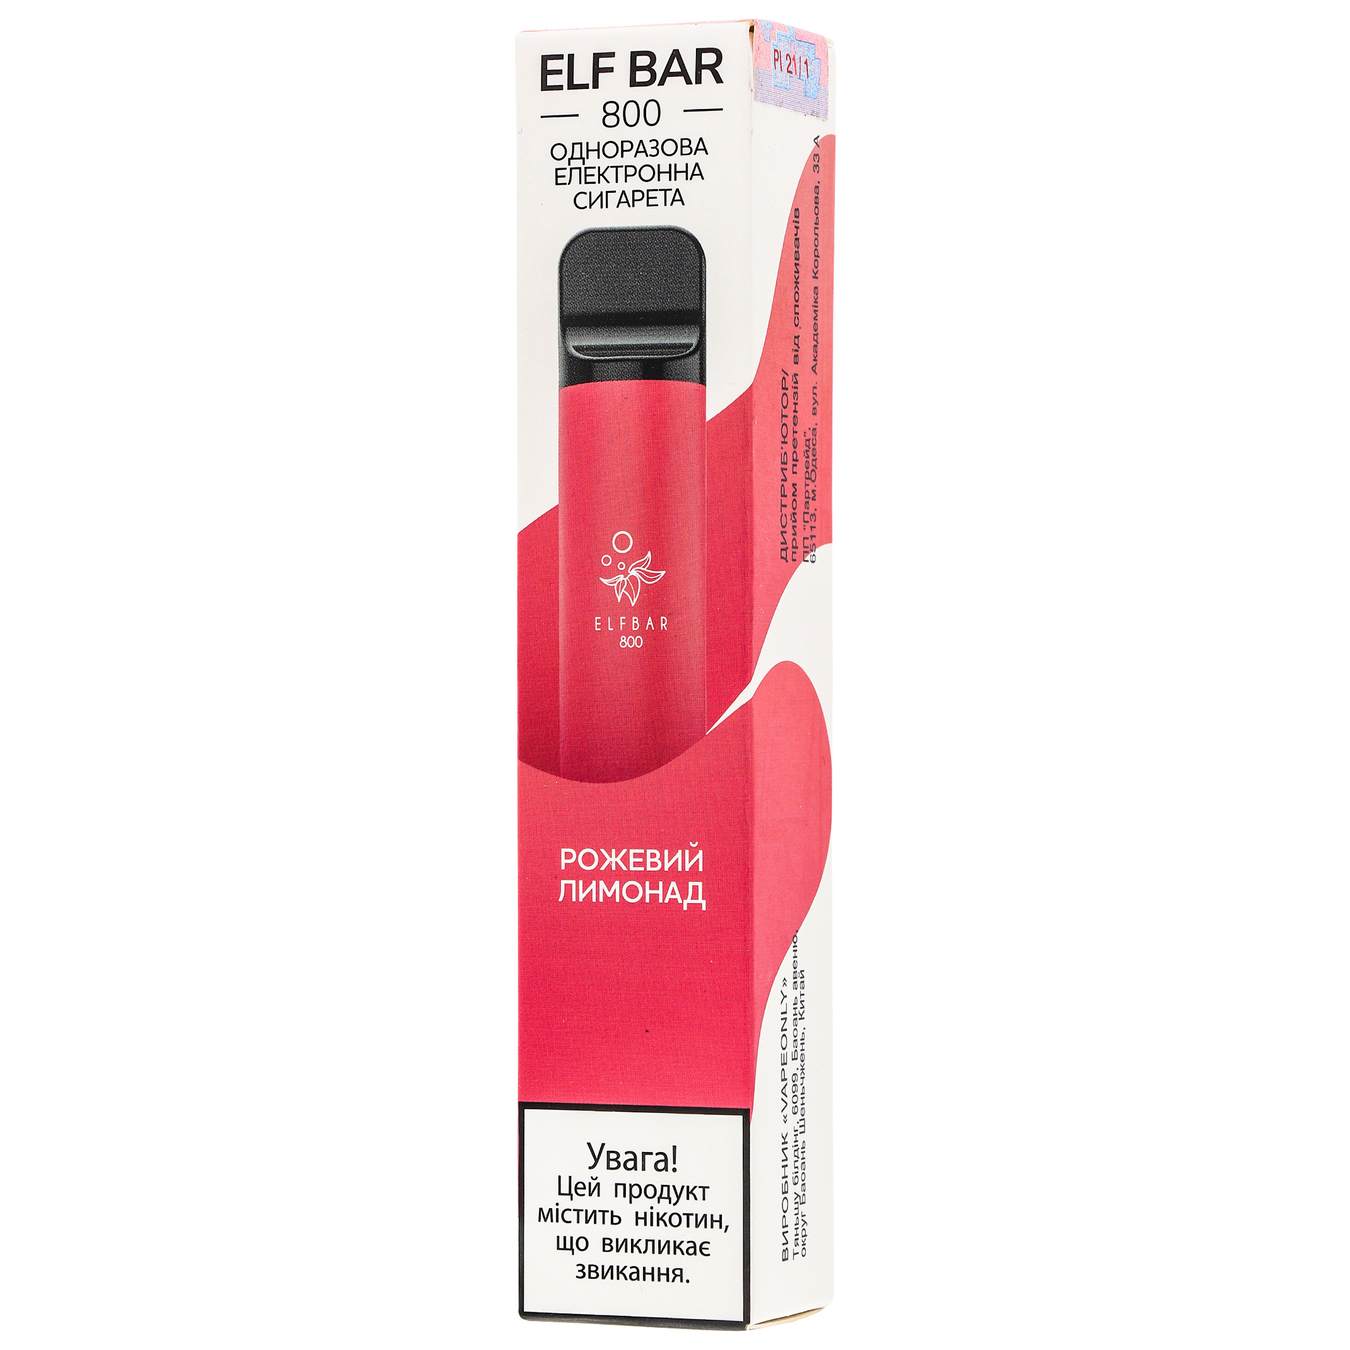 Elf Bar Electronic vaporizer pink lemonade 5% 3.2ml (the price is indicated without excise tax)